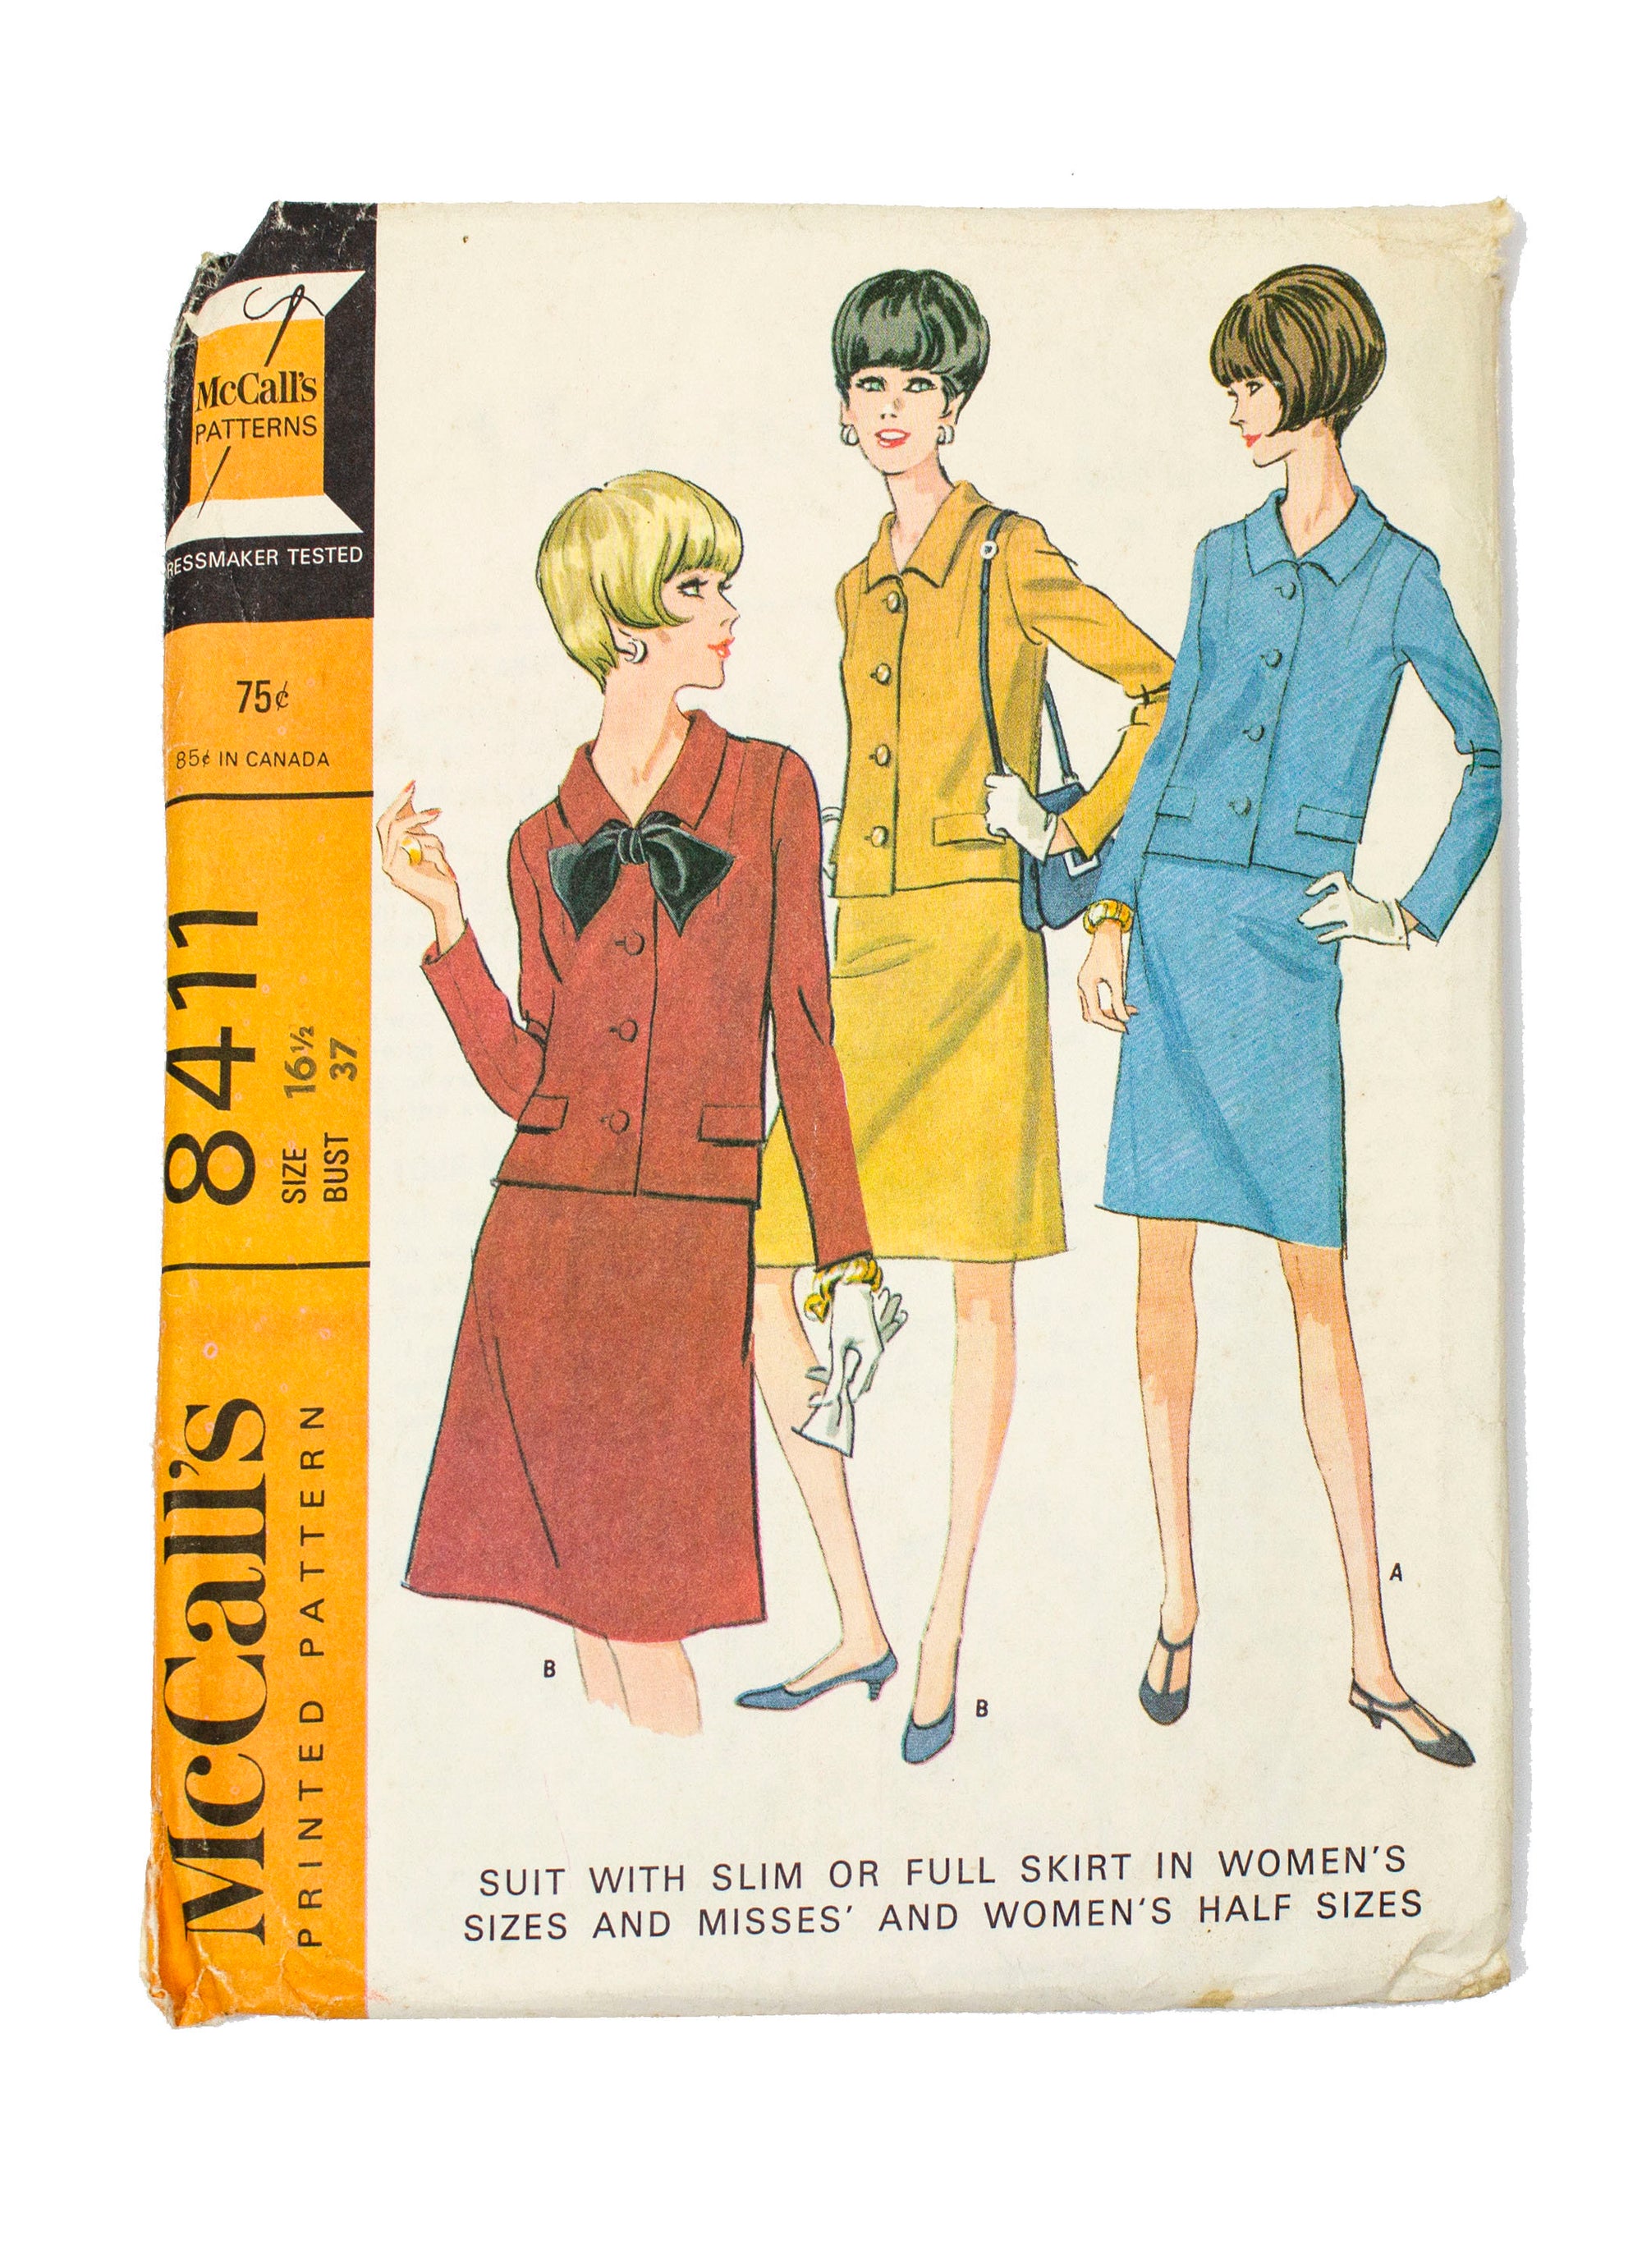 McCall's 8411 Womens Suit with Slim or Full Skirt - Size 16 1/2 Bust 37